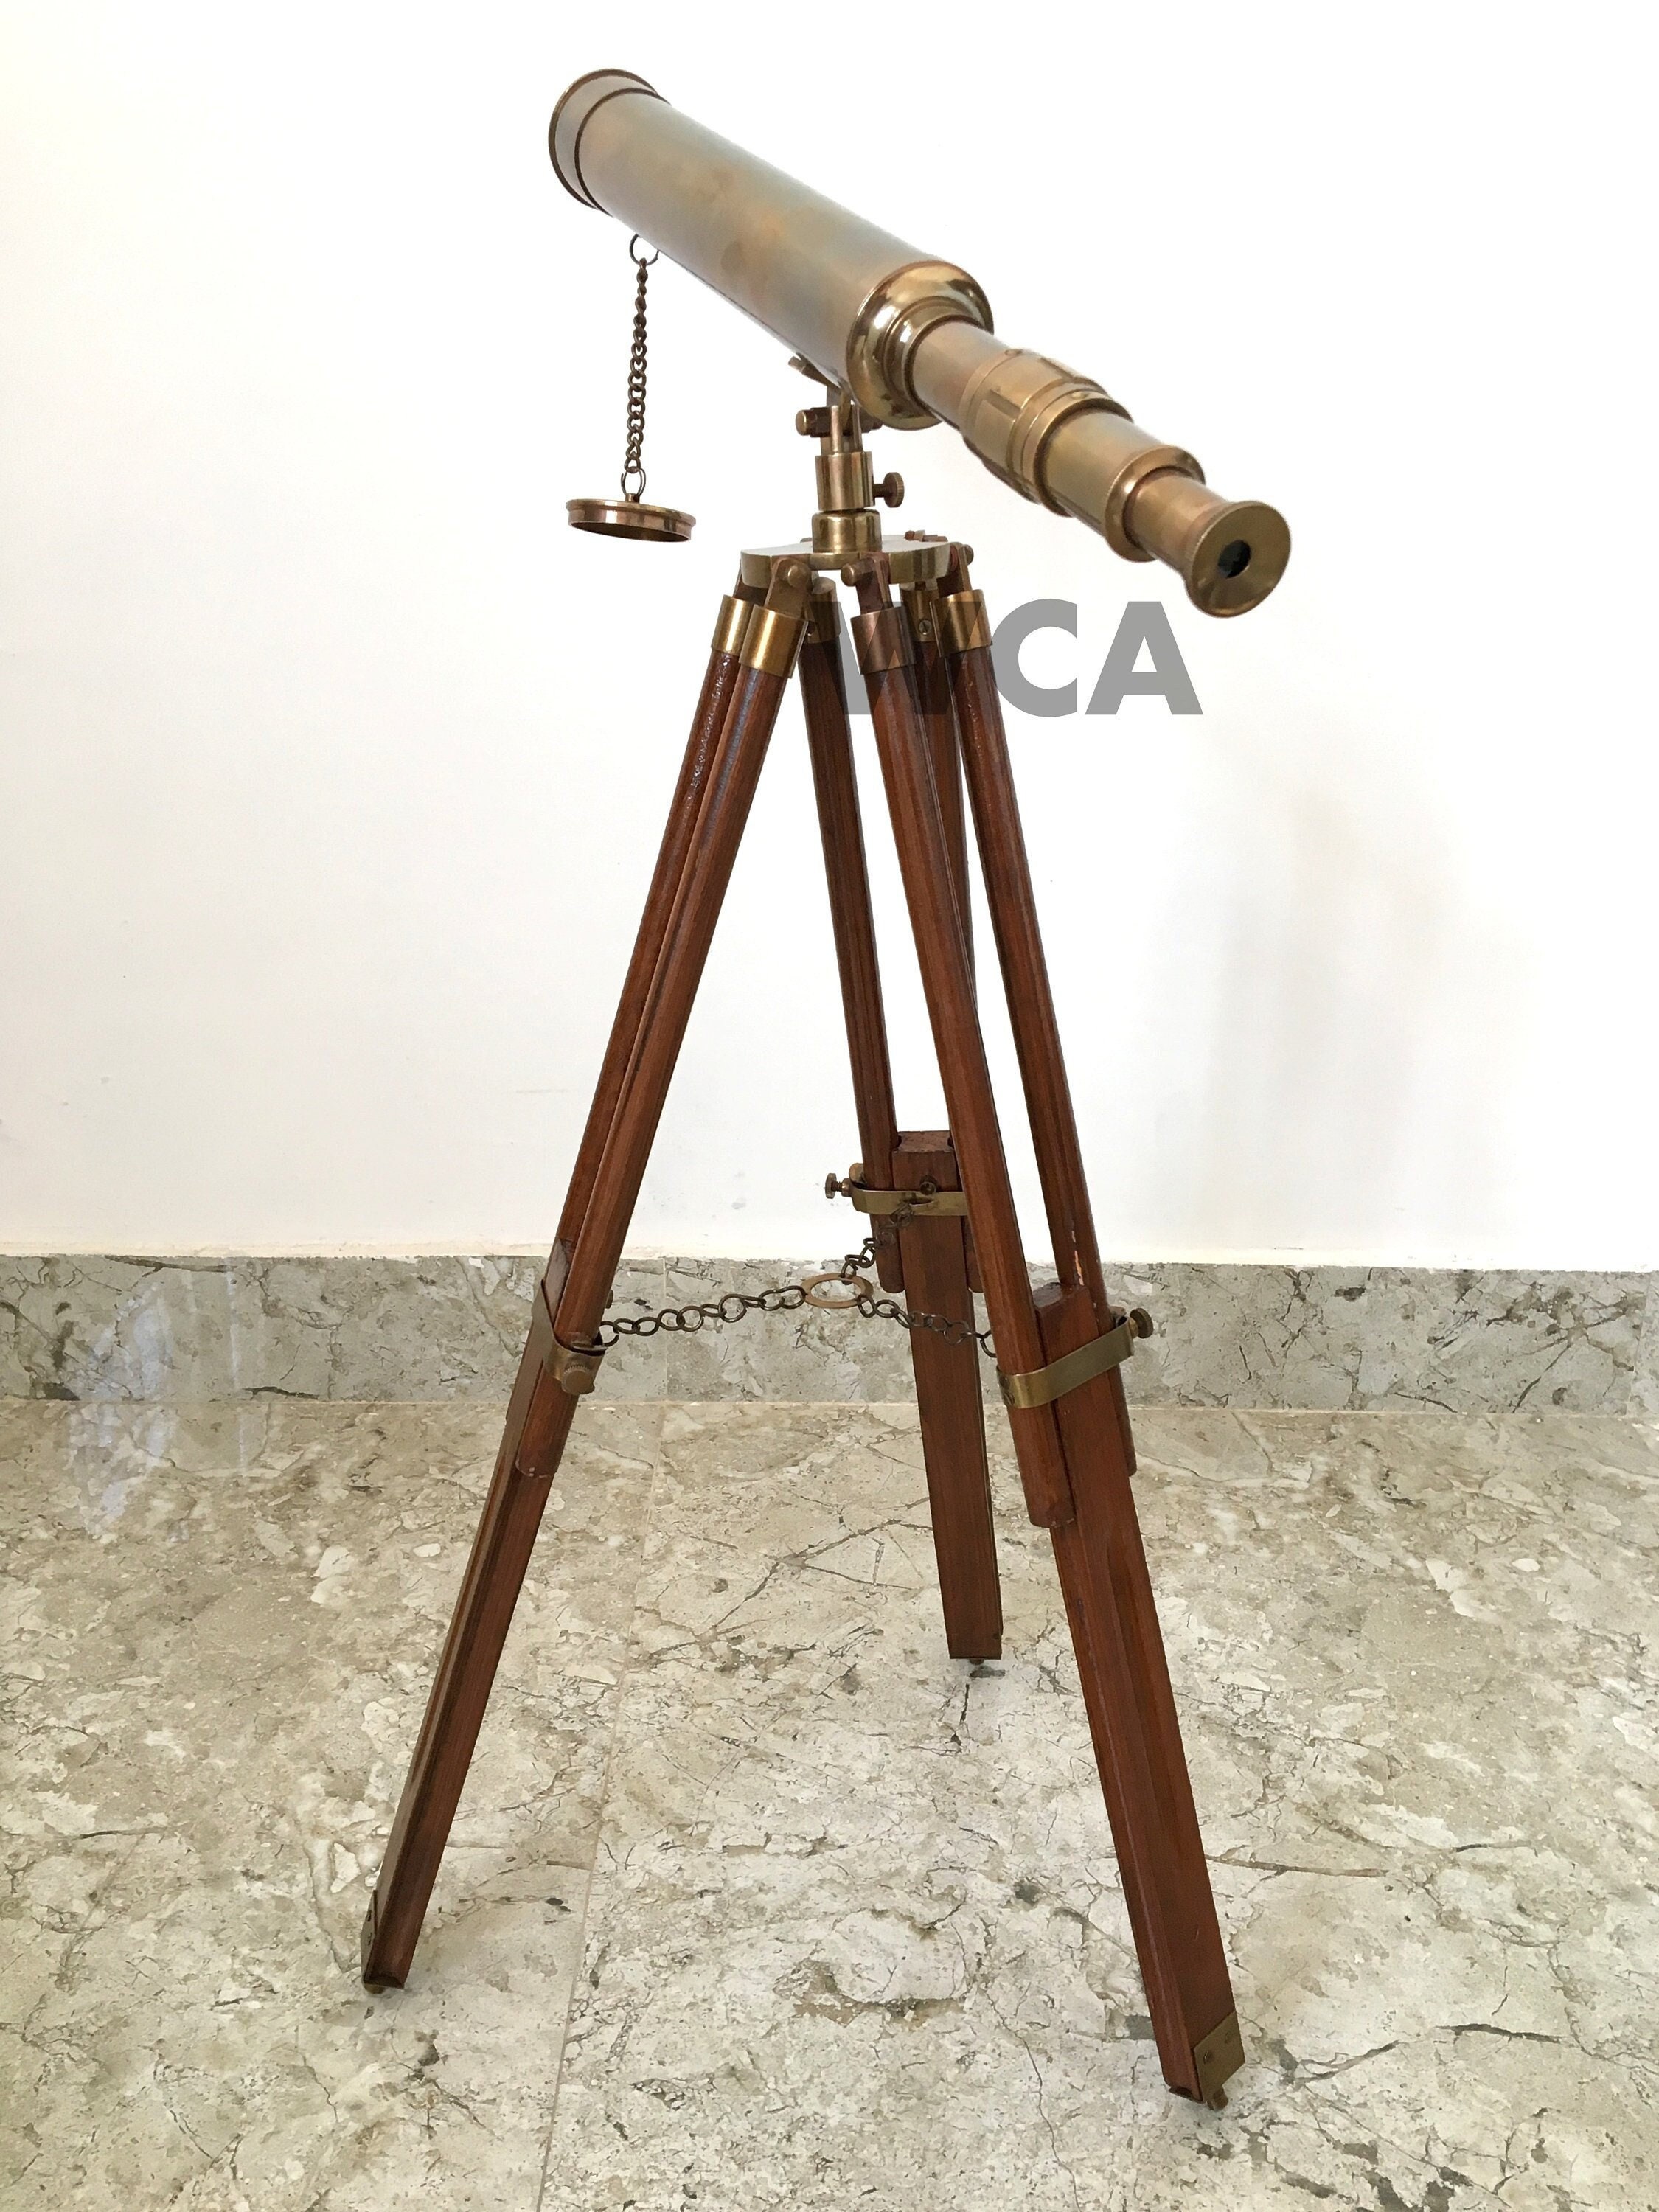 Details about   Antique Brass Maritime Spyglass Telescope With Wooden Tripod 